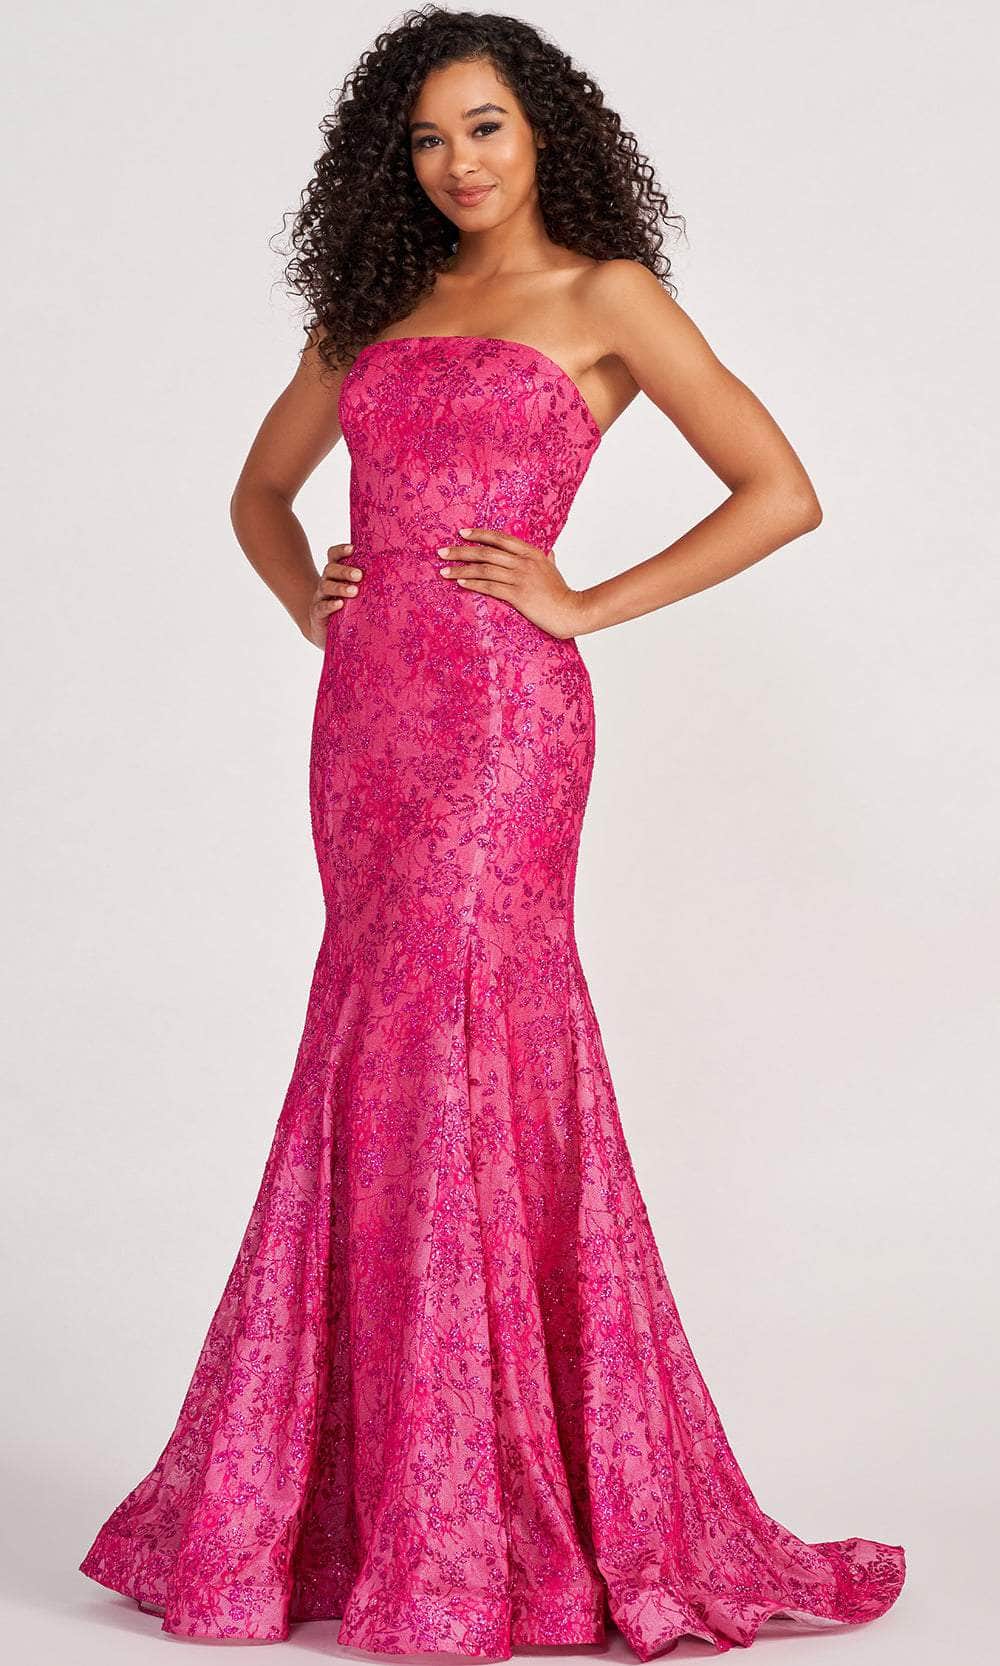 Colette for Mon Cheri CL2048 - Embellished Strapless Evening Gown Evening Dresses 00 / Fuchsia